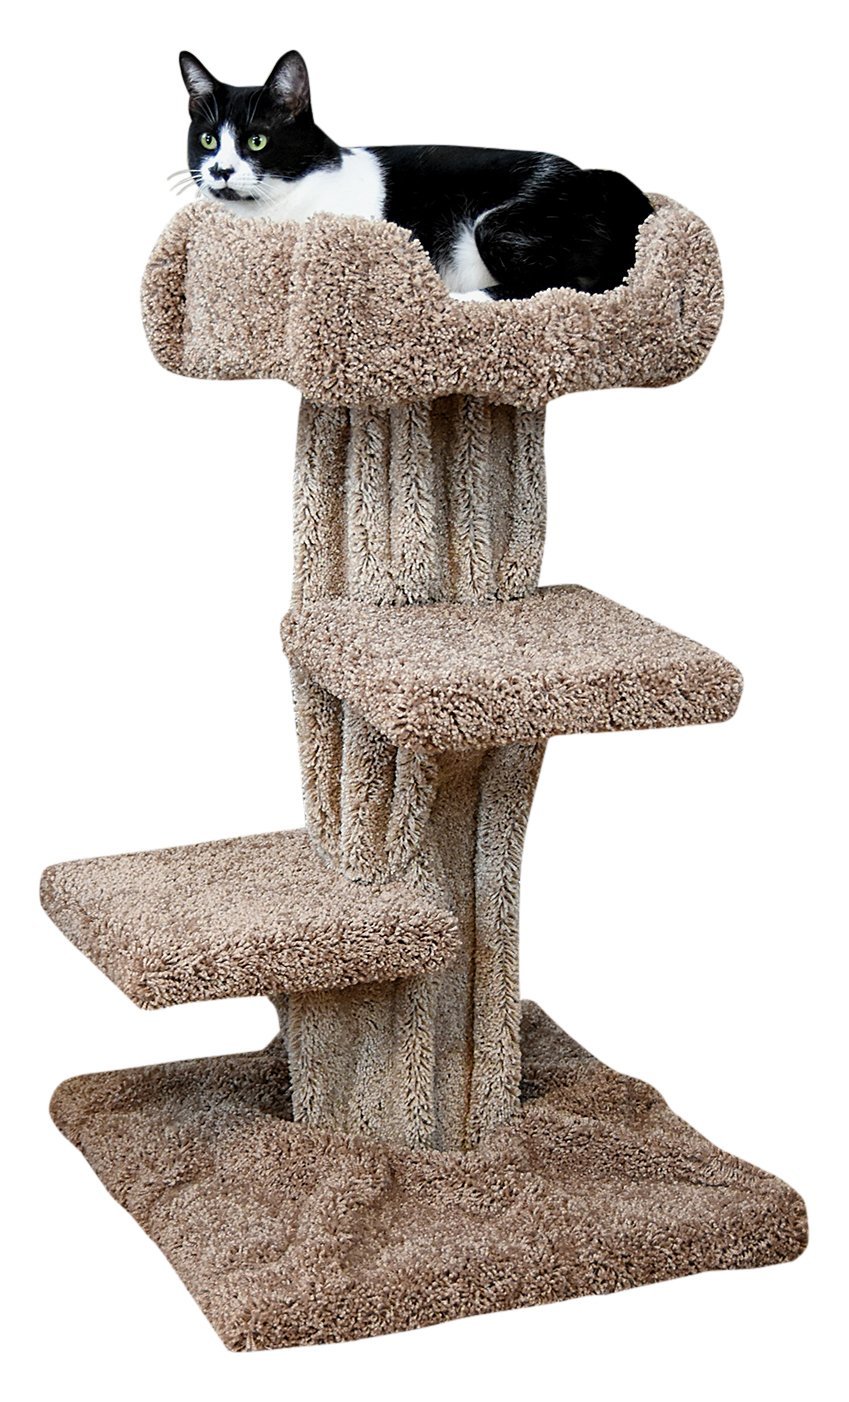 This is a carpeted cat tree that looks like a tree and is suitable for large cats. Large cats would love this cat tree, I really do think.